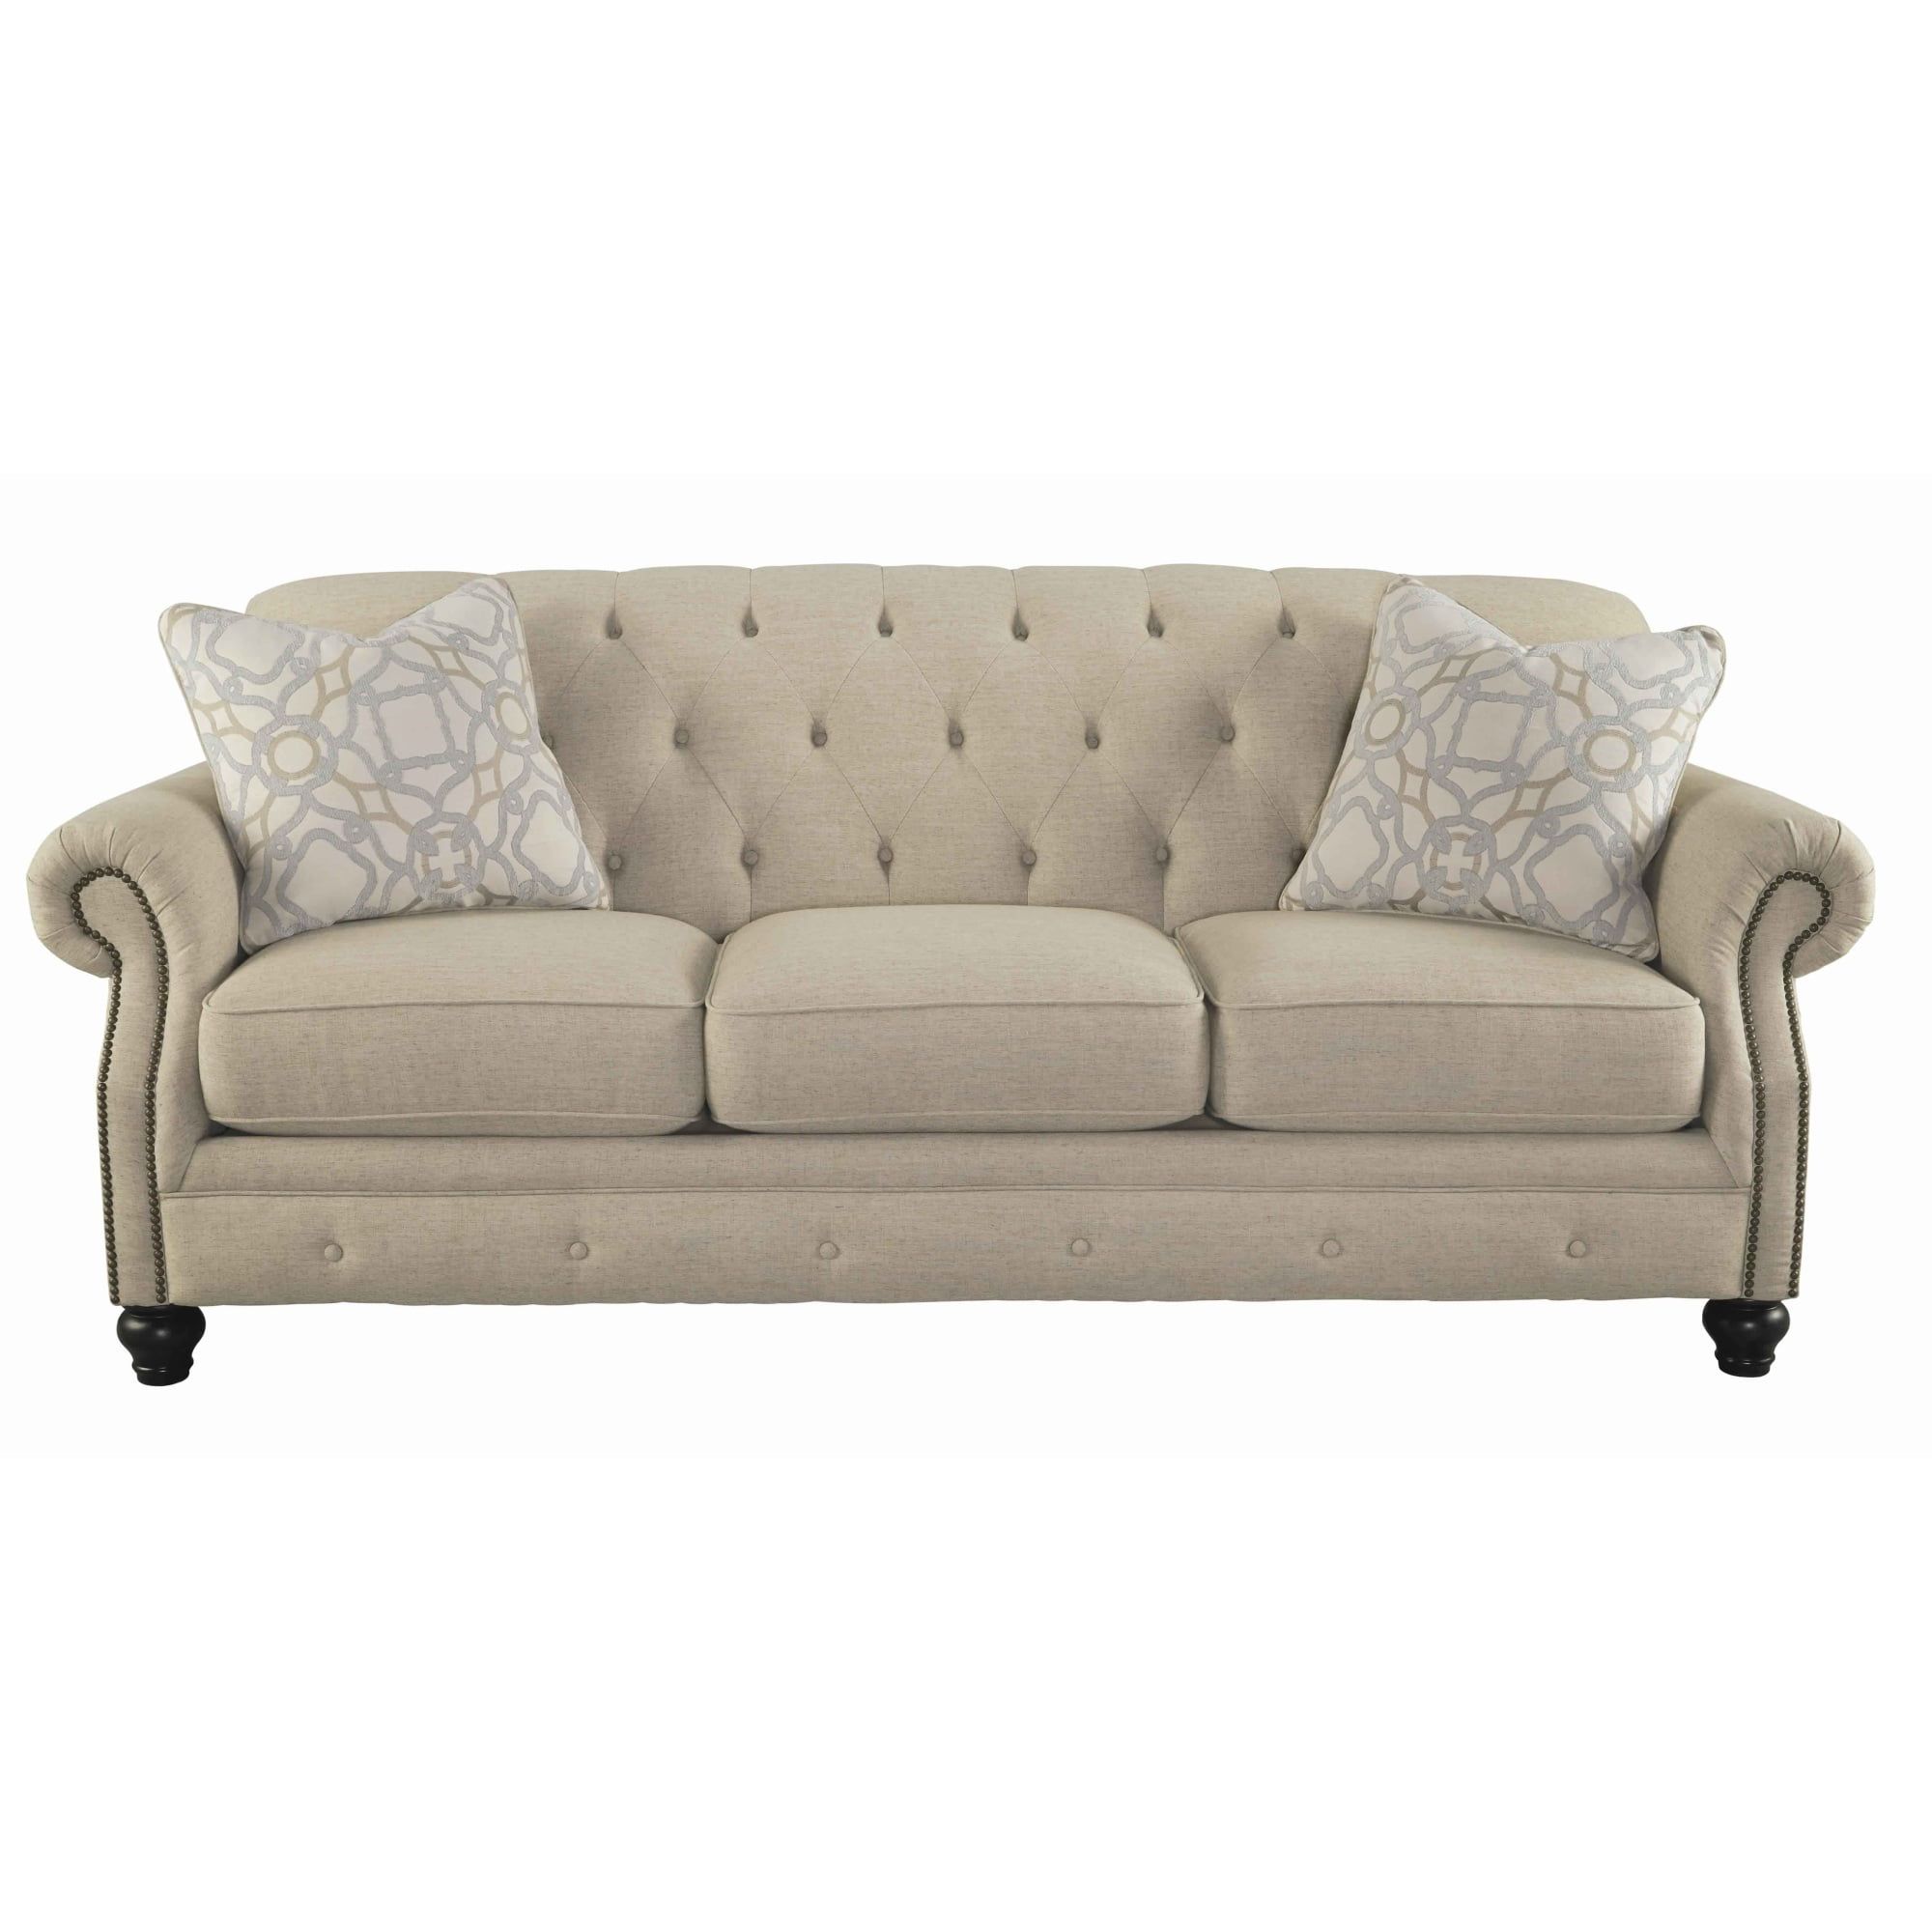 Chesterfield Design Fabric Upholstered Sofa With Button Tufted Back Within Tufted Upholstered Sofas (View 7 of 20)